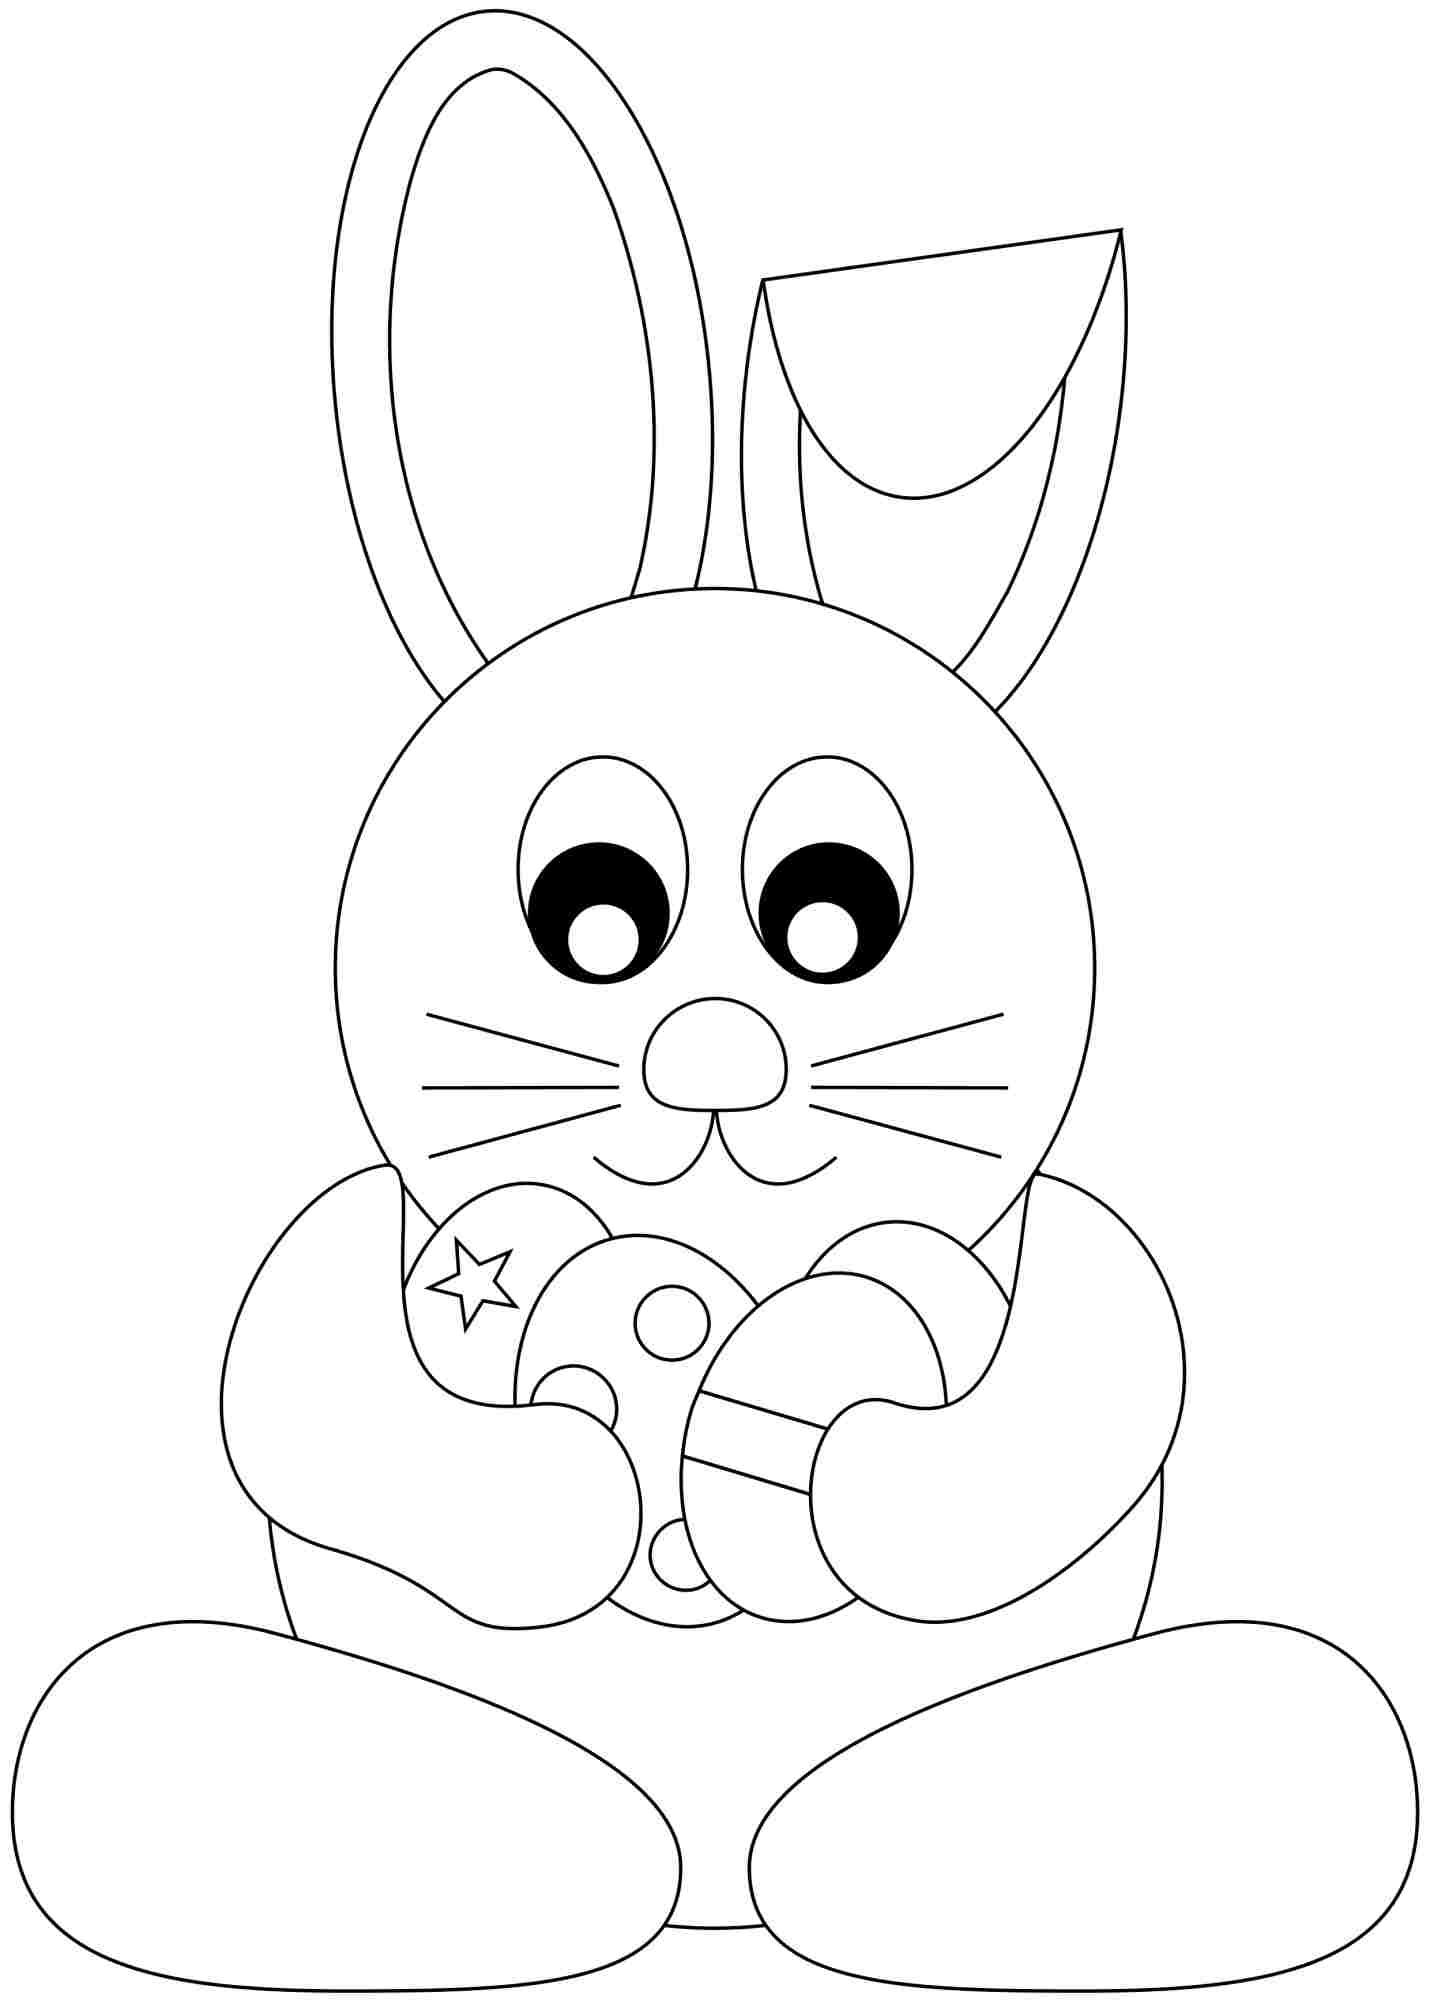 easy-easter-bunny-drawing-at-getdrawings-free-download